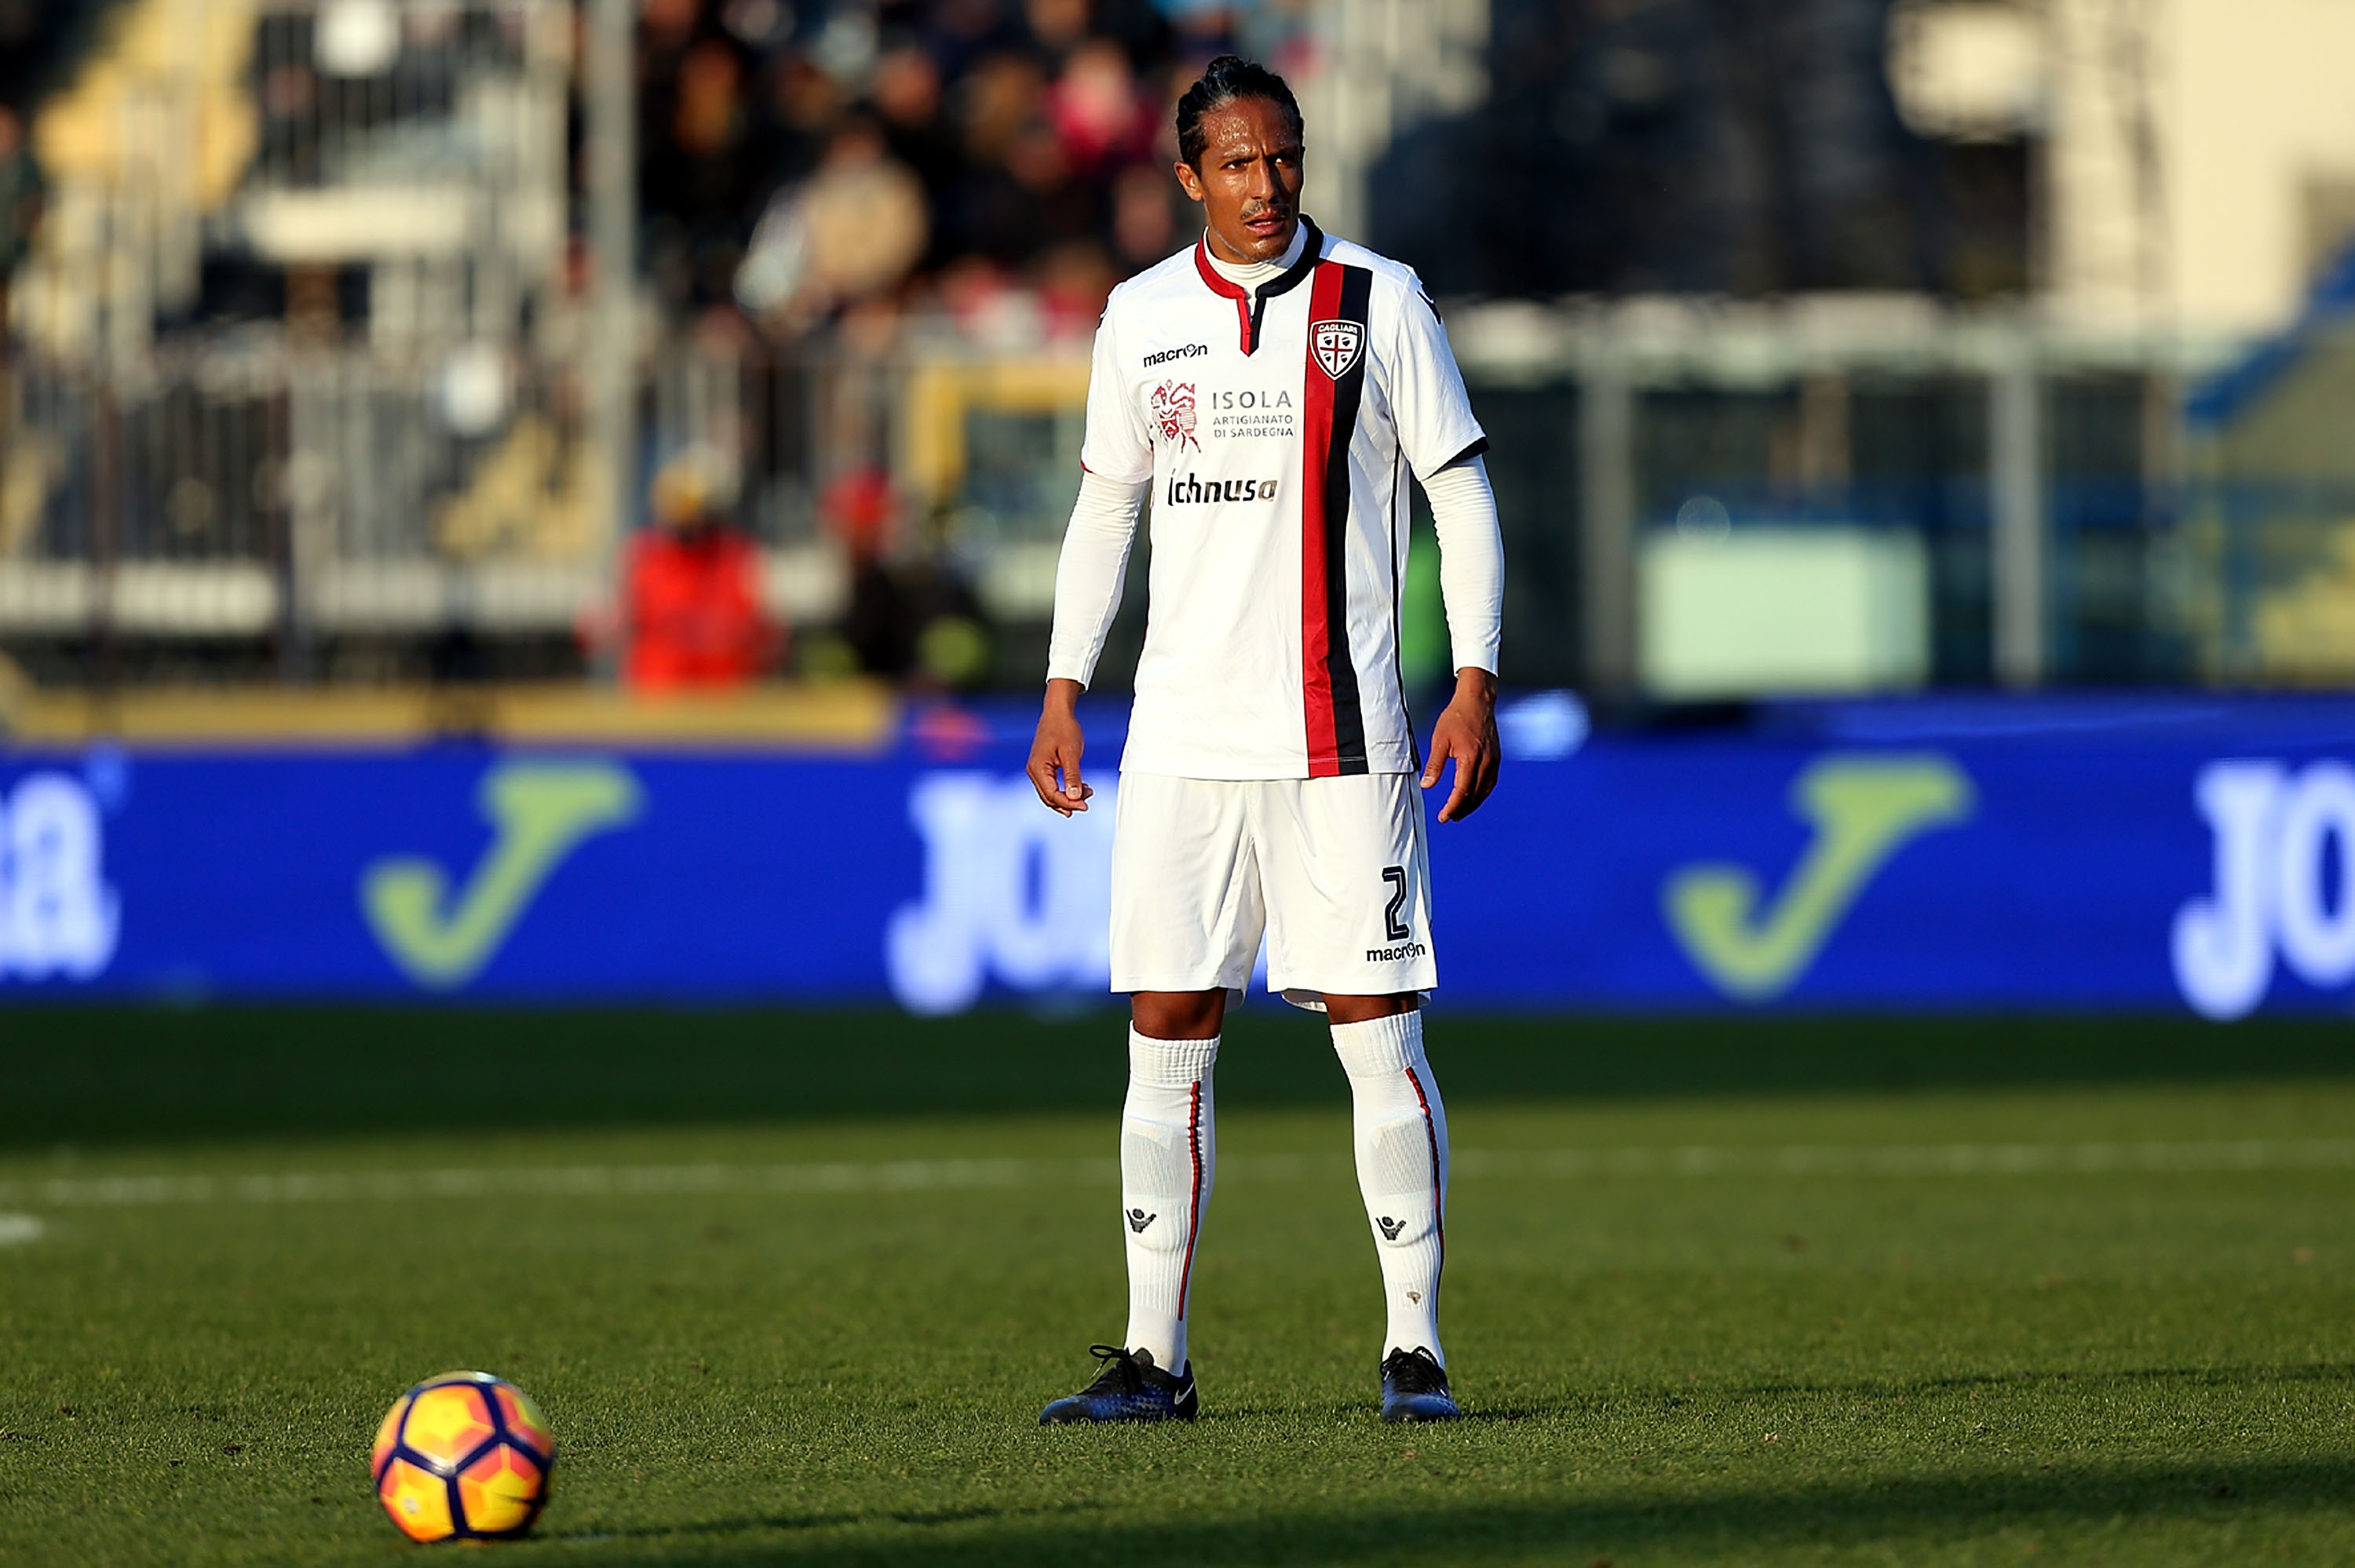 Bruno Alves: “We want to win against Inter”